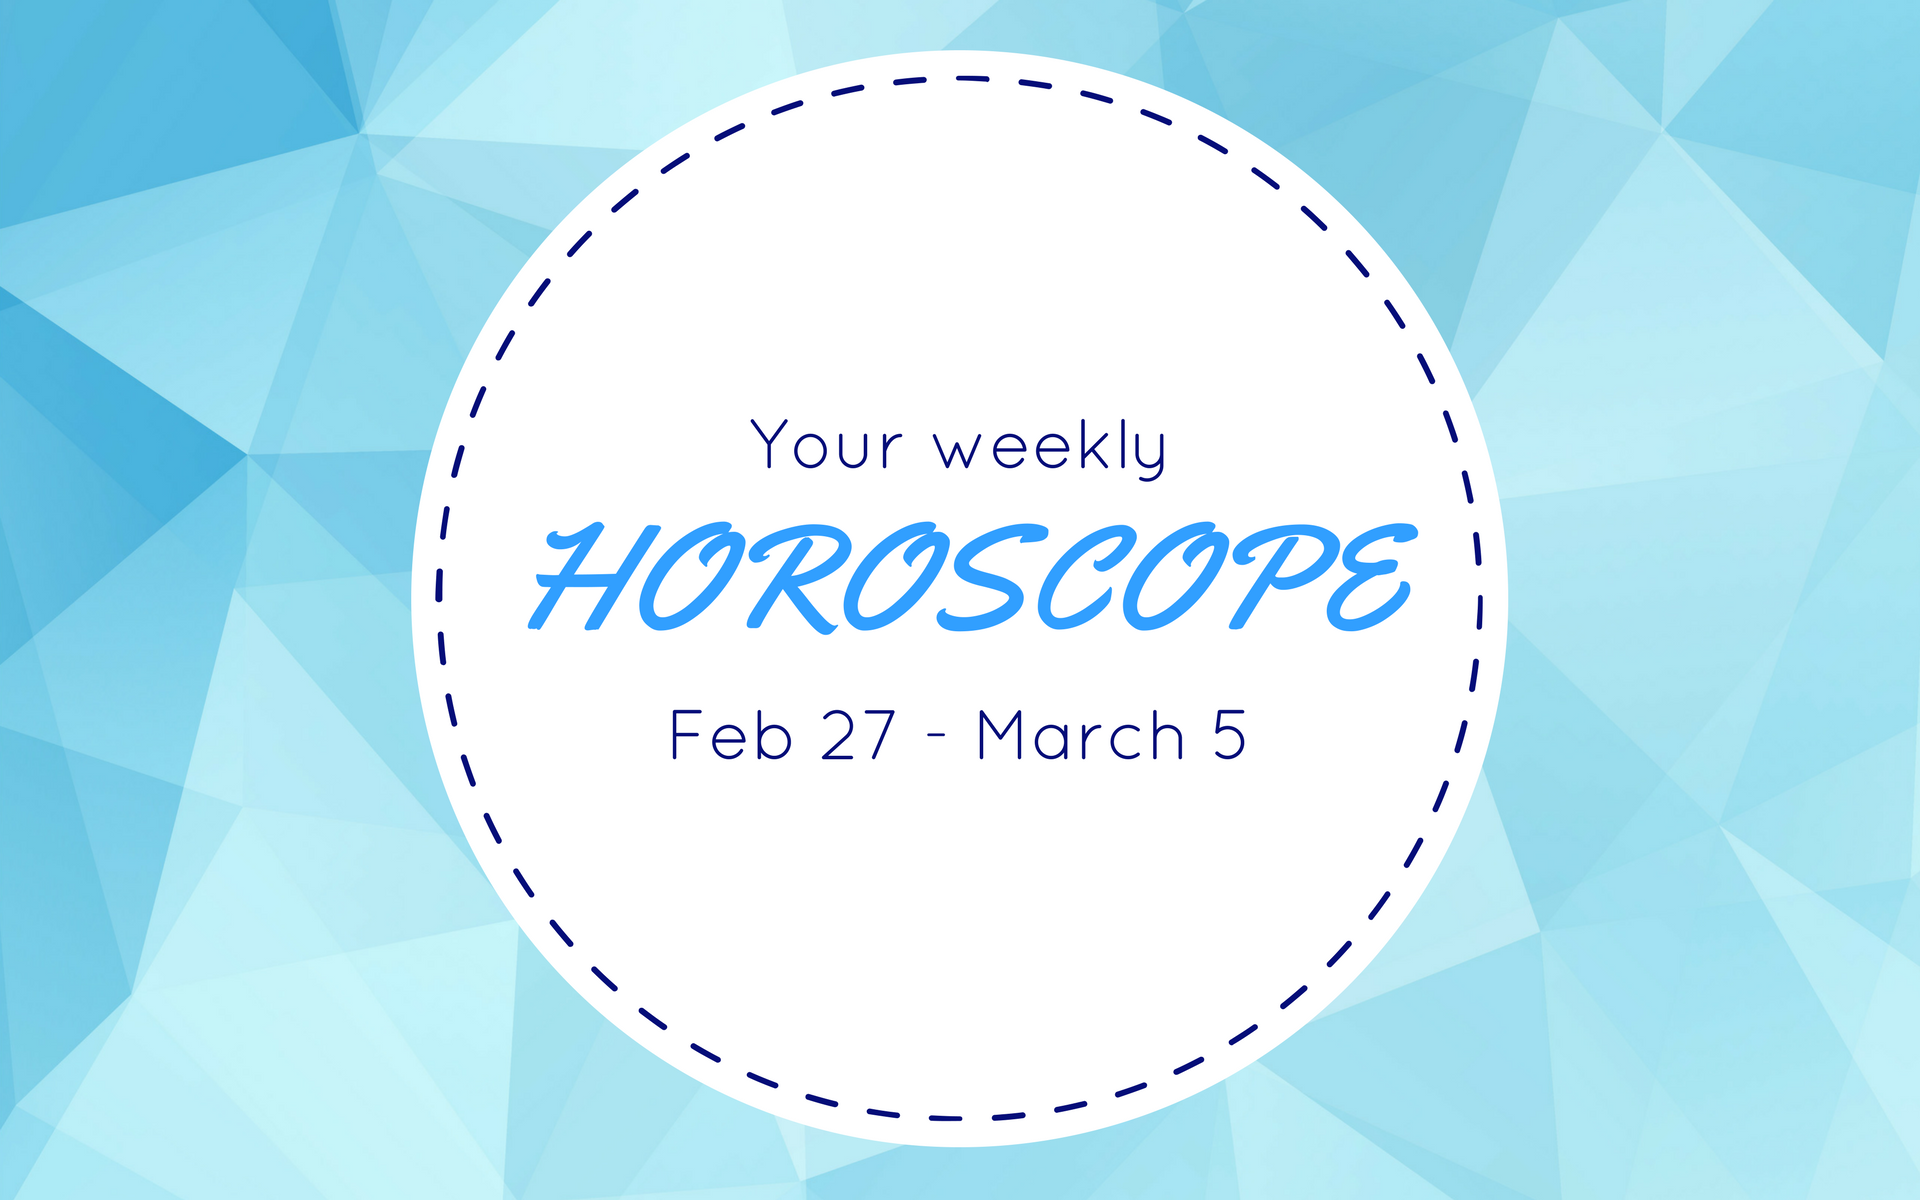 Your Weekly Horoscope: Feb 27 - March 5